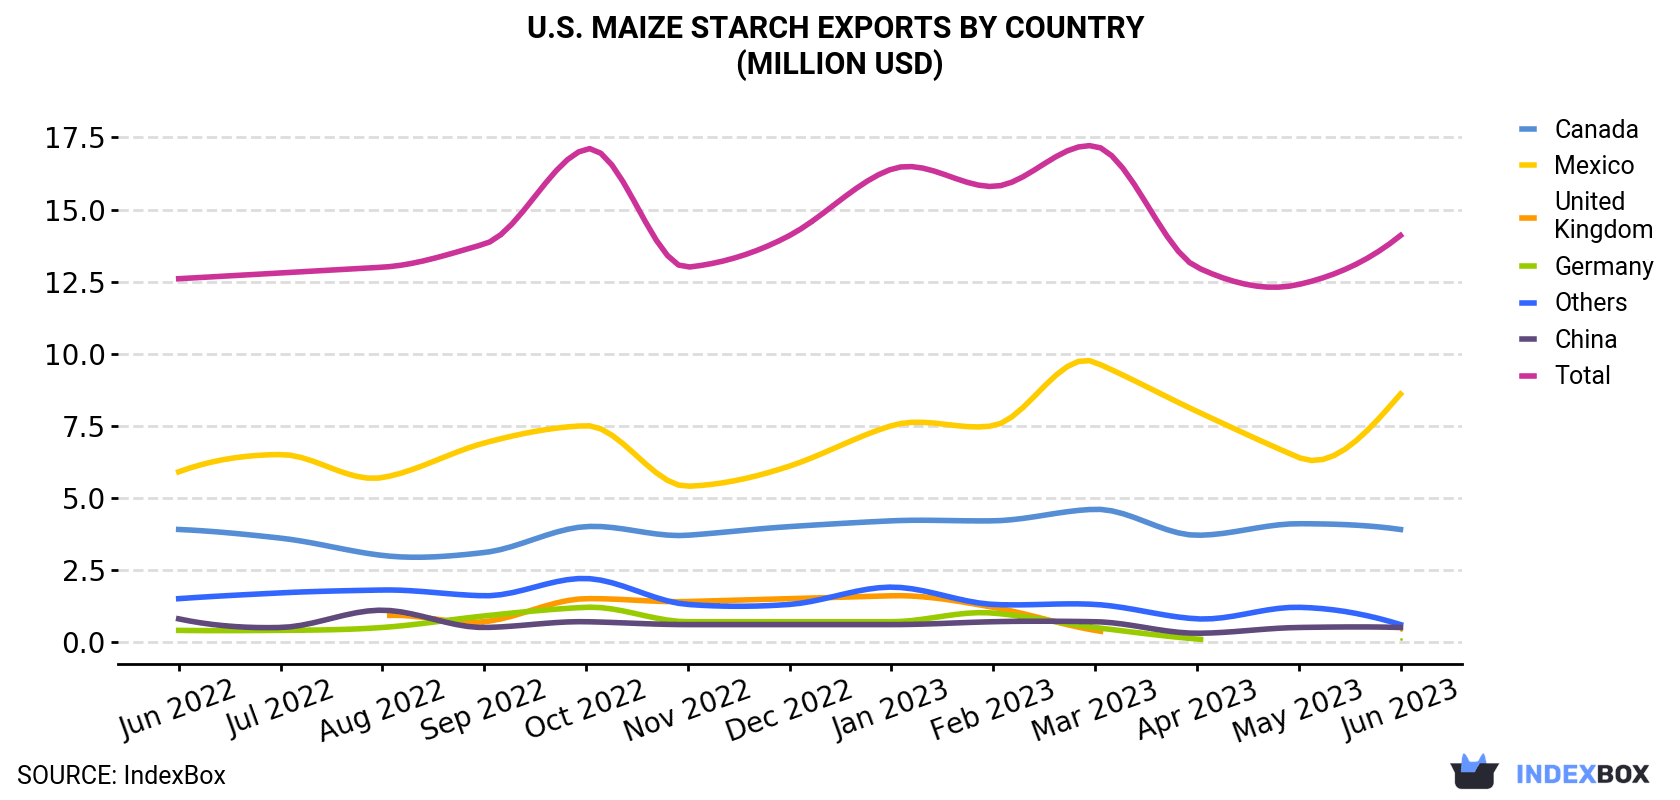 U.S. Maize Starch Exports By Country (Million USD)